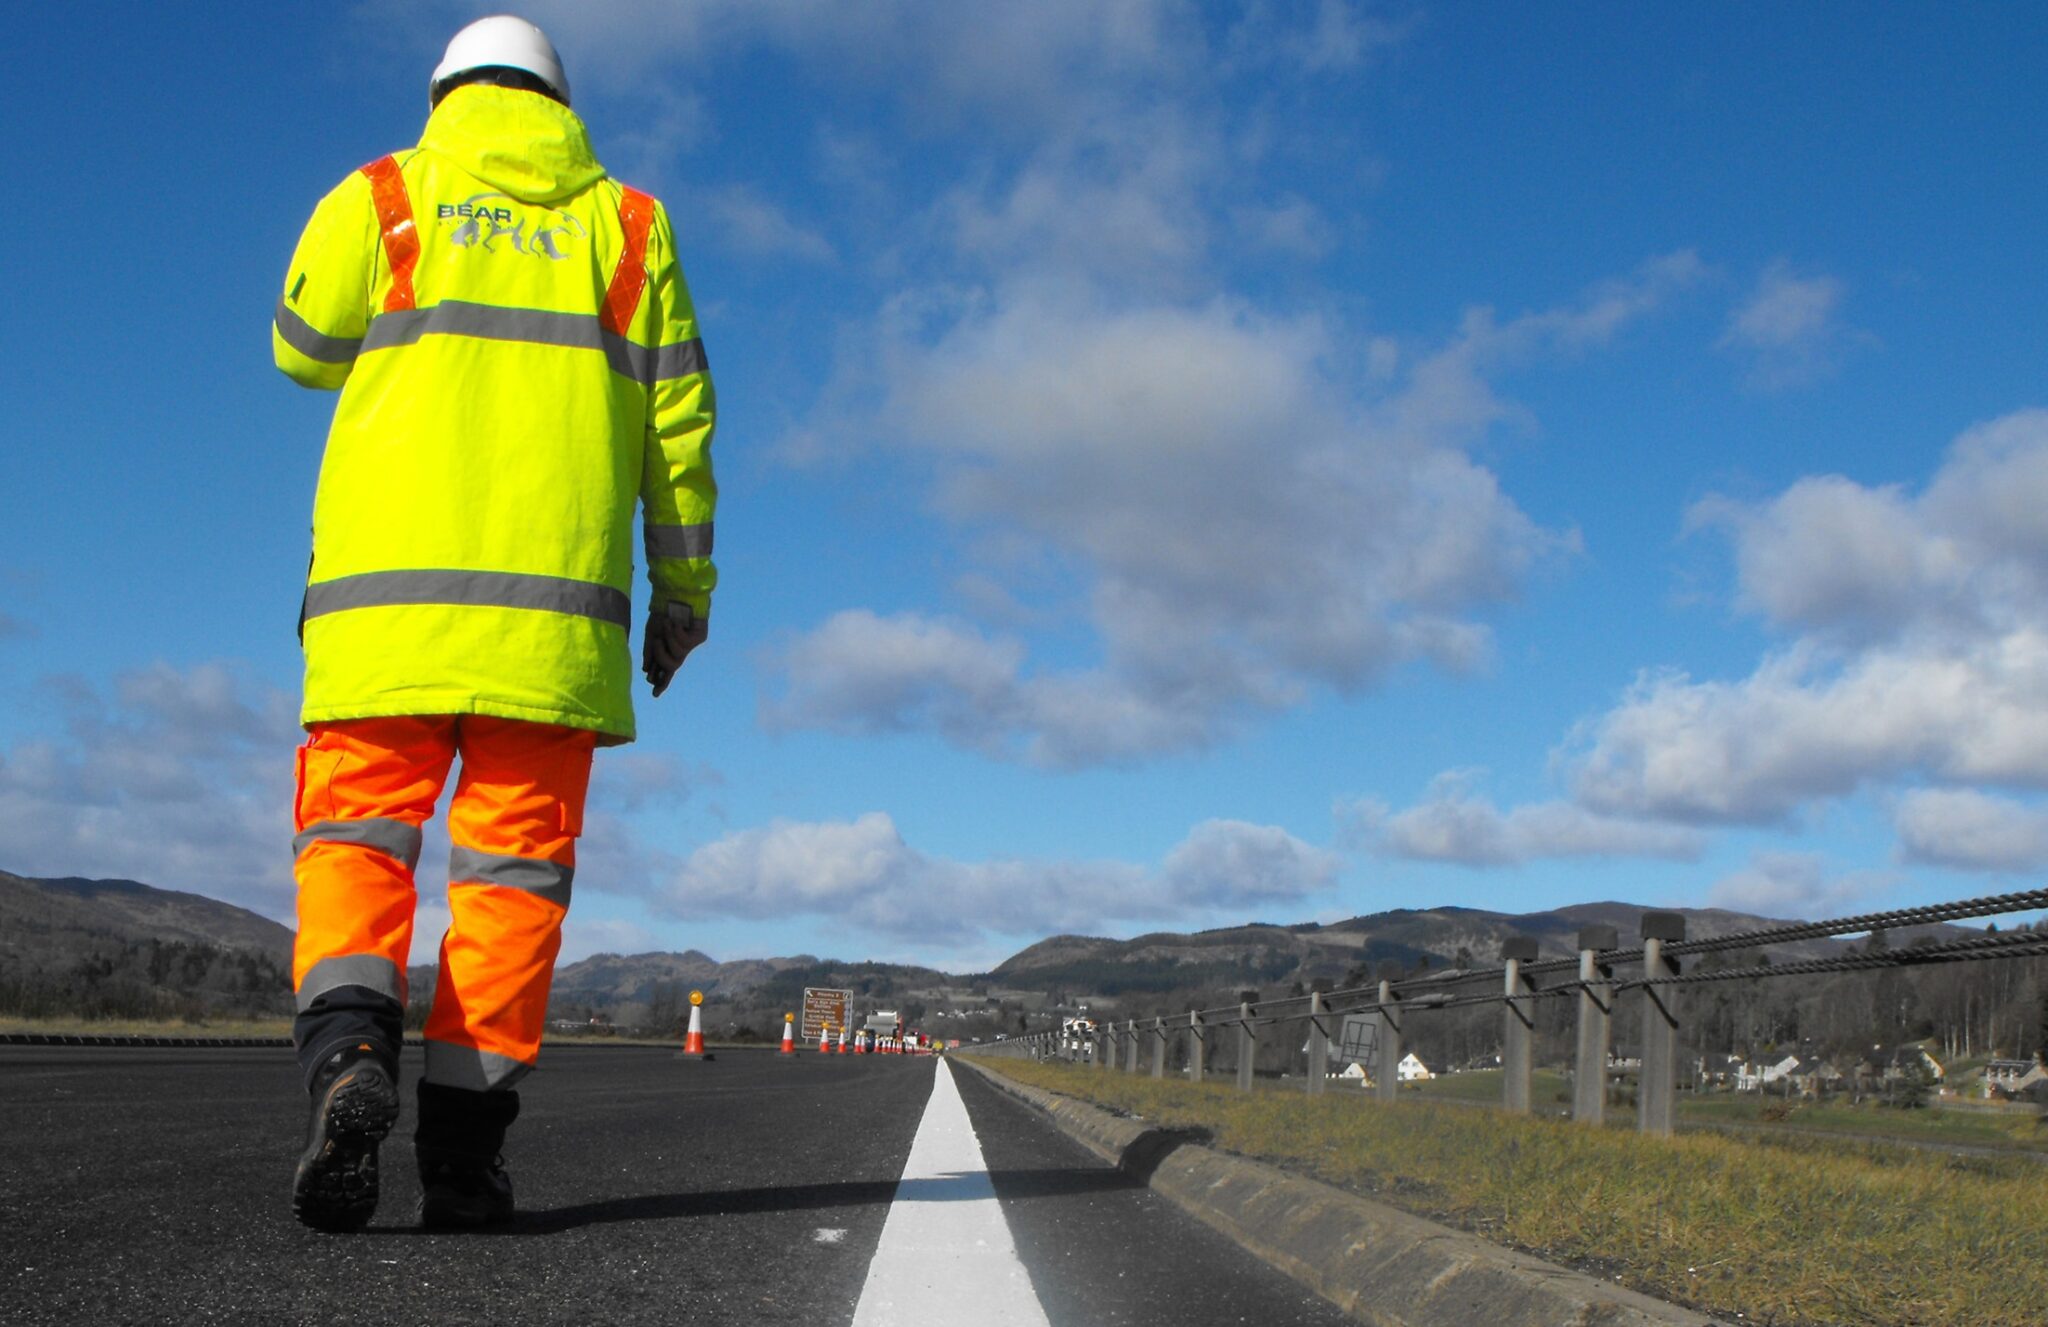 SECOND PHASE OF FOOTWAY IMPROVEMENTS ON THE A82 FORT AUGUSTUS UNDERWAY